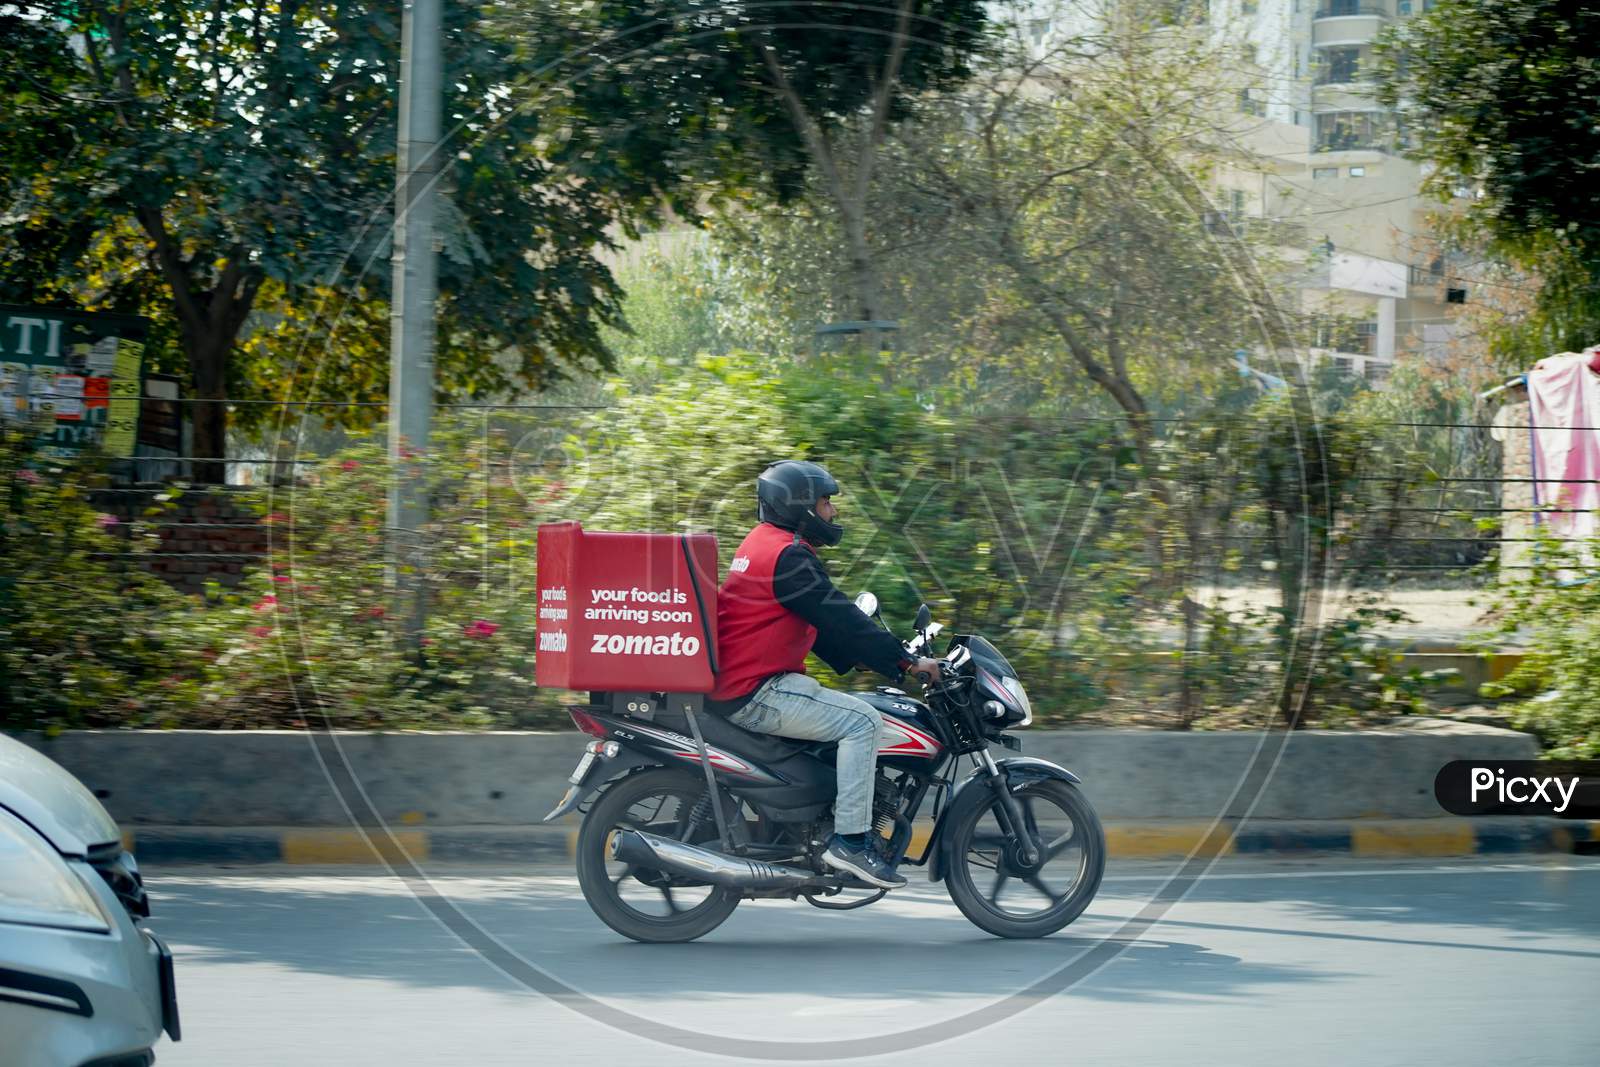 Zomato Delivery Boy With Red Hot Box For Food On A Bike Zooming At High Speed To Deliver Orders For The Upcoming Foodtech Startup From India Which Has Gained A Lot During The Covid Coronavirus Pandemic